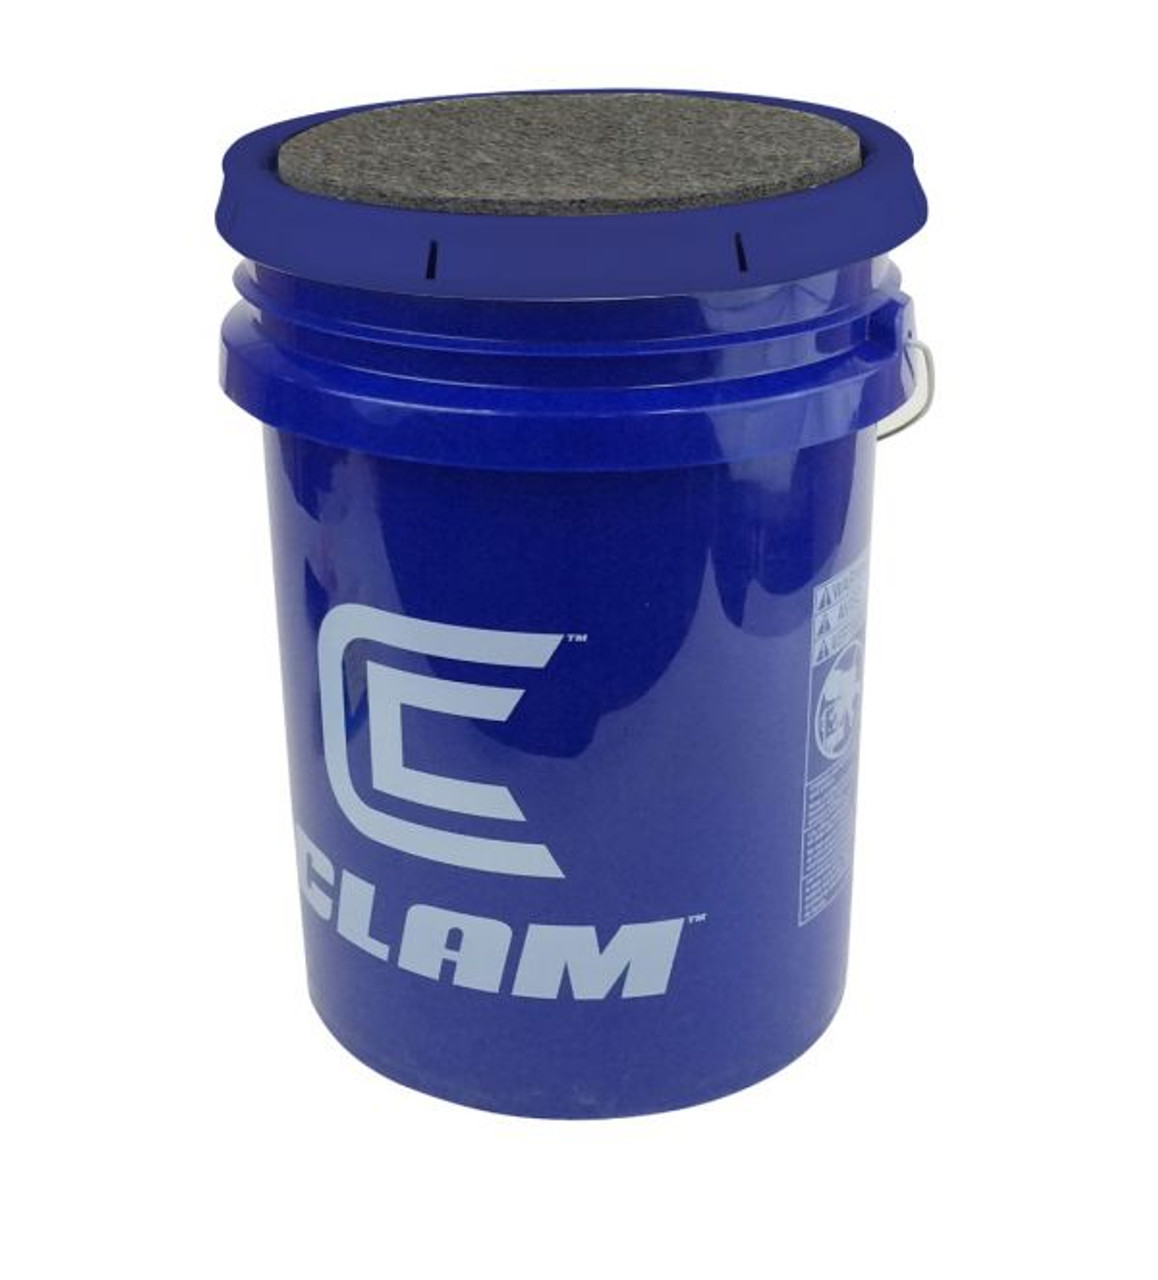 Clam Bait Bucket - 2 Gal. w/ Insulated Carry Case from